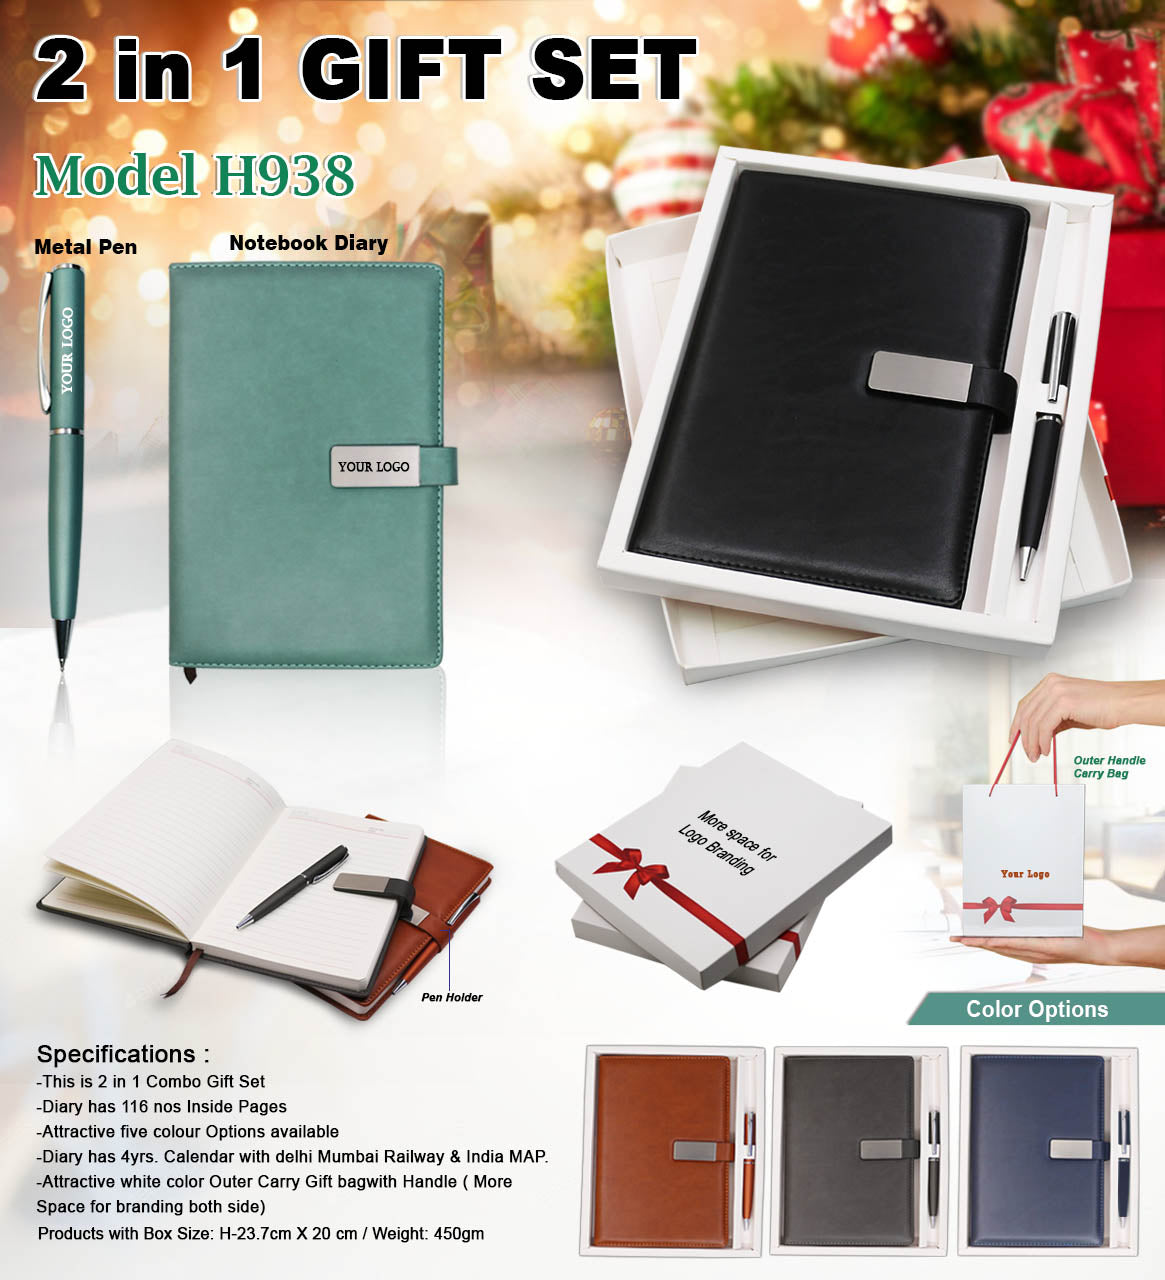 Gift Set 2in1 Notebook Diary, and Pen - For Employee Joining Kit, Corporate, Client or Dealer Gifting H938